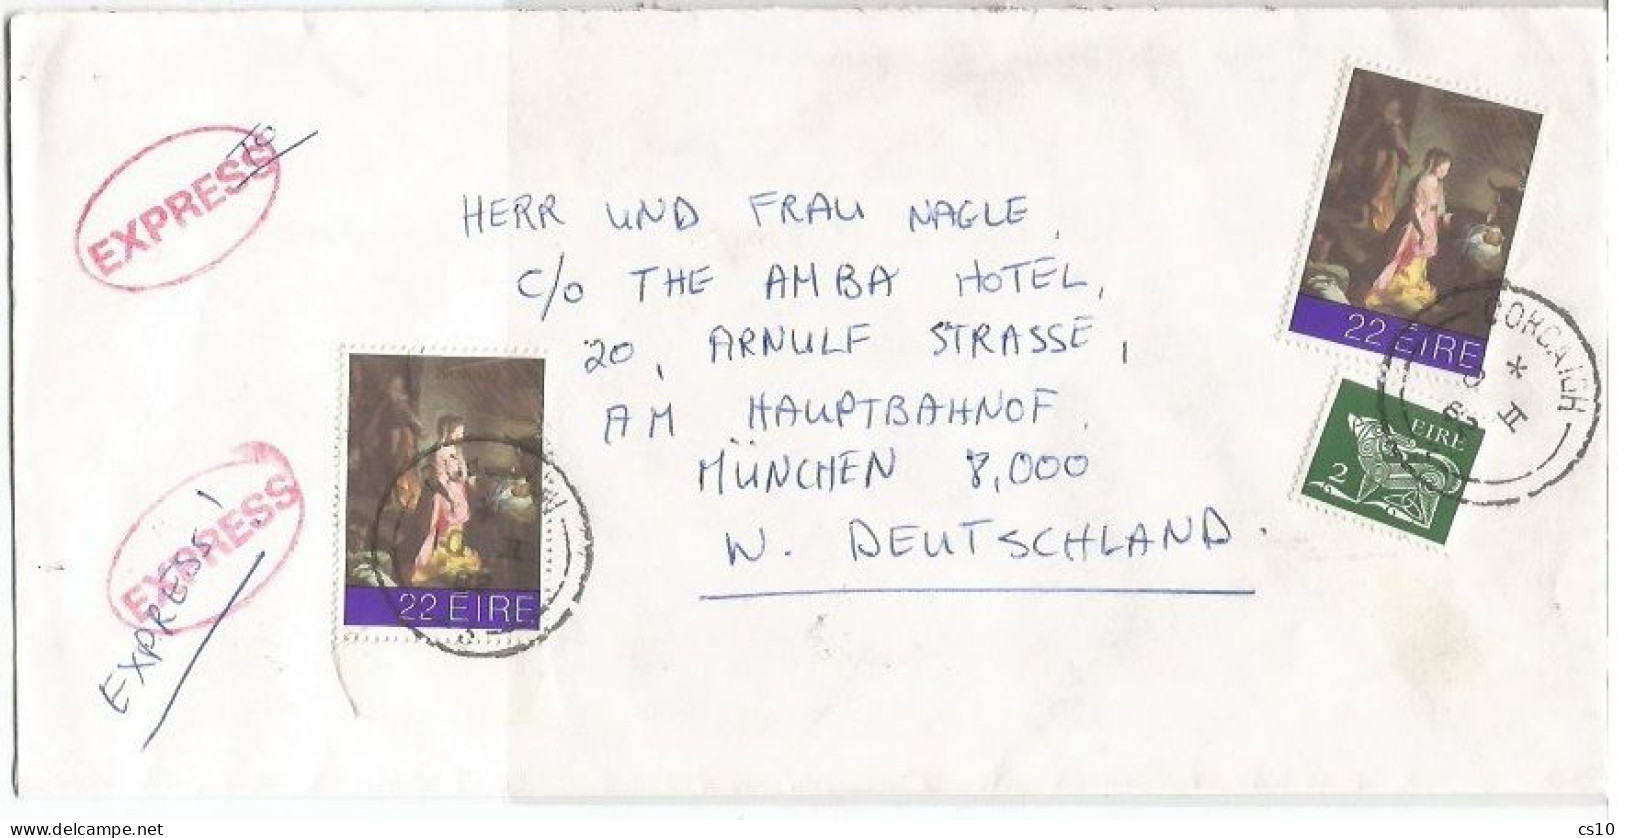 Eire Express CV Cork City 10feb1982 To Germany Munchen Flughafen 11feb (back) With Xmas P.22x2 + P.2 Regular - Covers & Documents